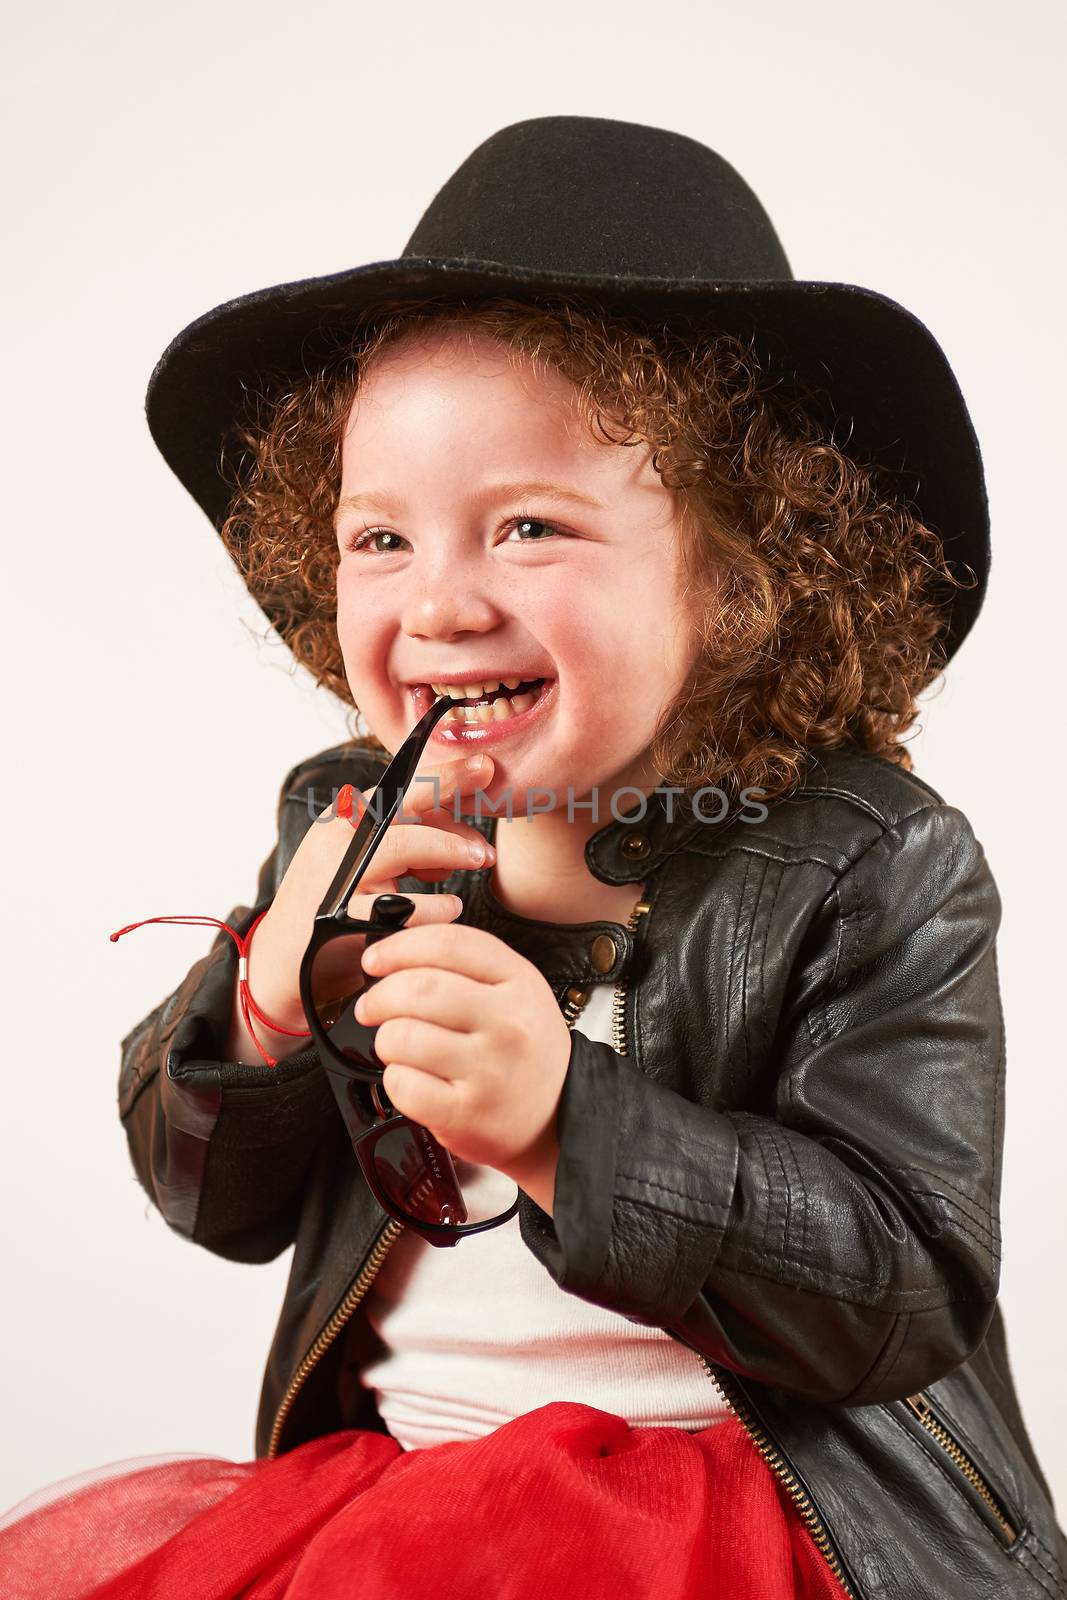 Little Girl Fashion Model With Black Hat by Multipedia